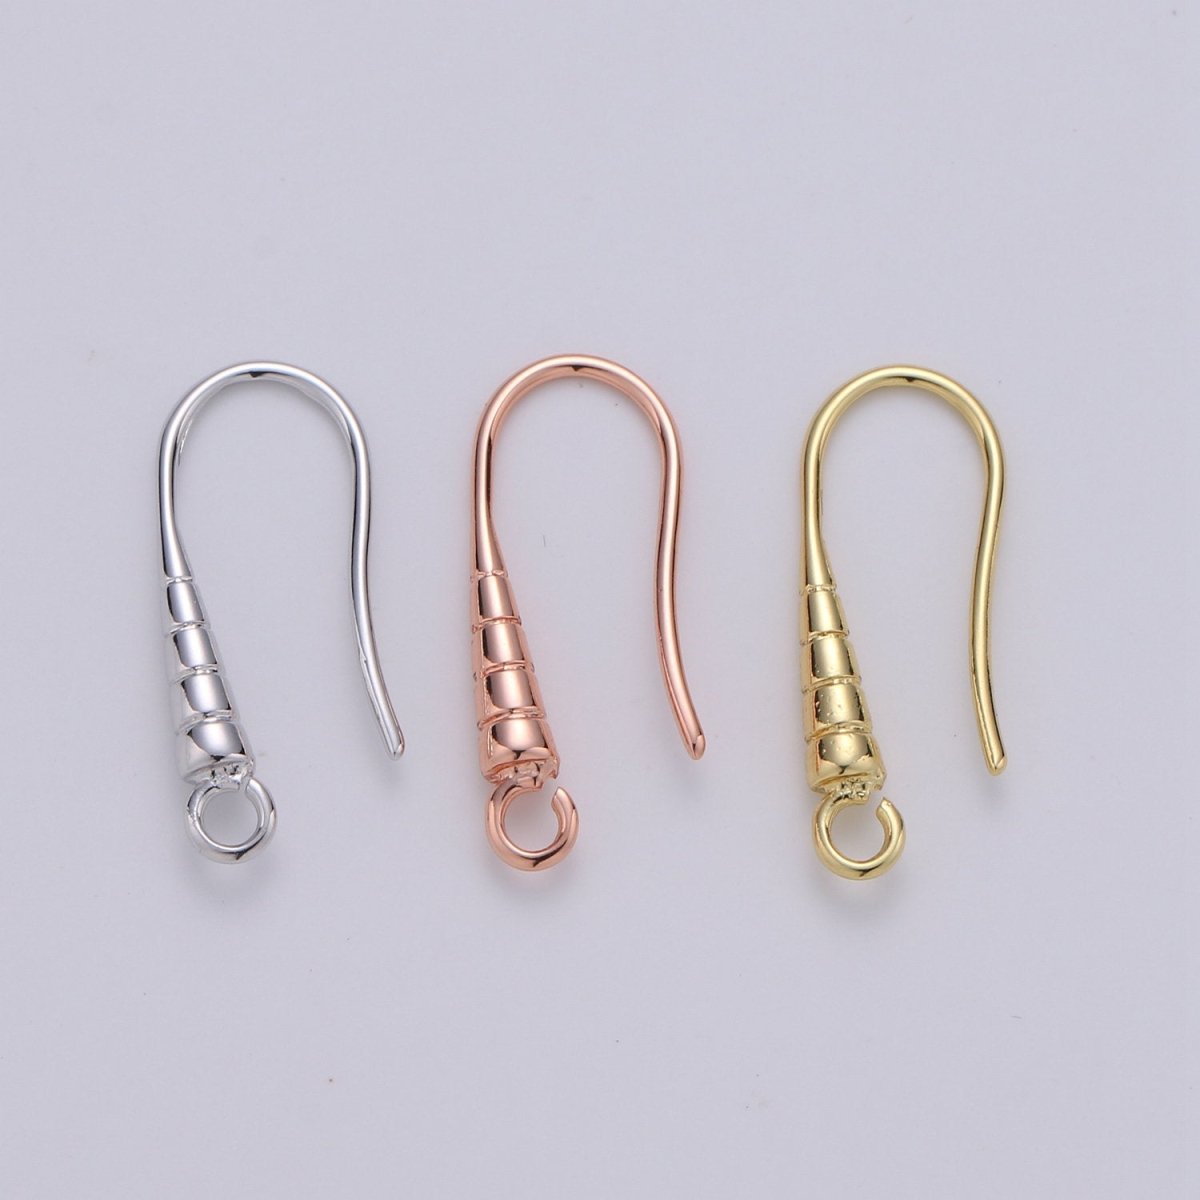 20mm Line Textured French Hook Earrings Open Loop Supply in Gold, Silver, Rose Gold K-687 - K-689 - DLUXCA